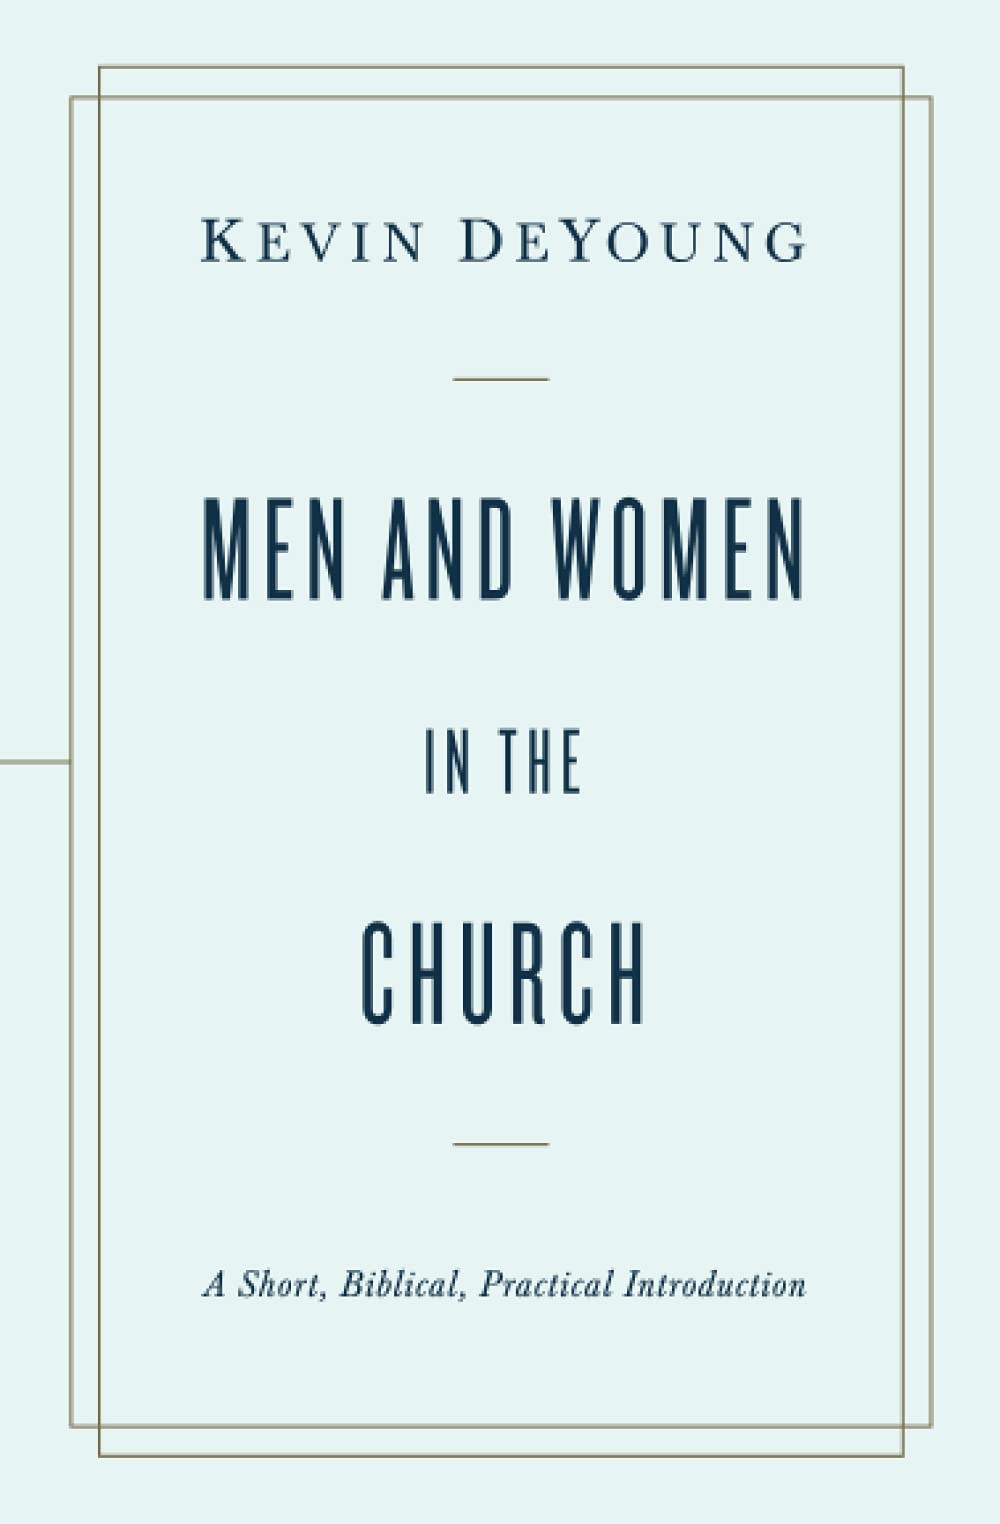 Men and Women in the Church: A Short, Biblical, Practical Introduction (Book Review)